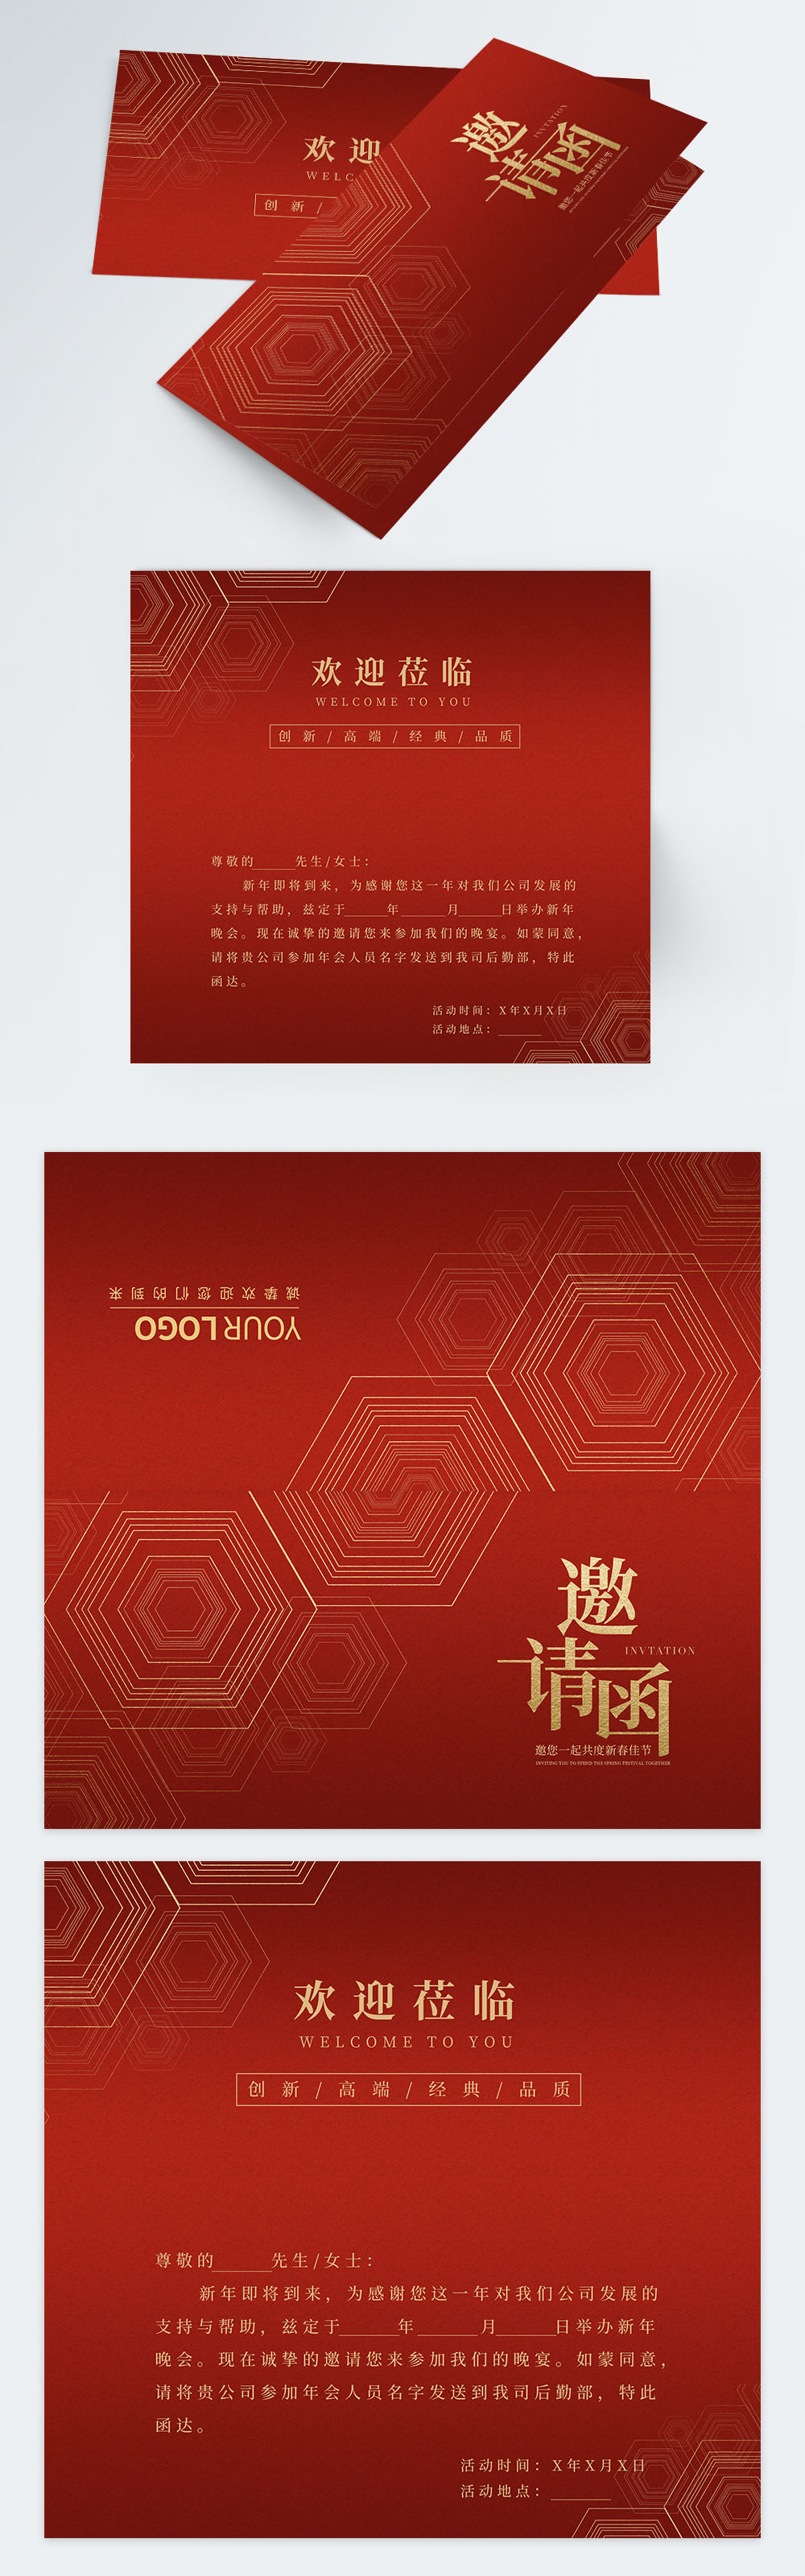 red-geometry-new-year-party-invitation-template-image-picture-free